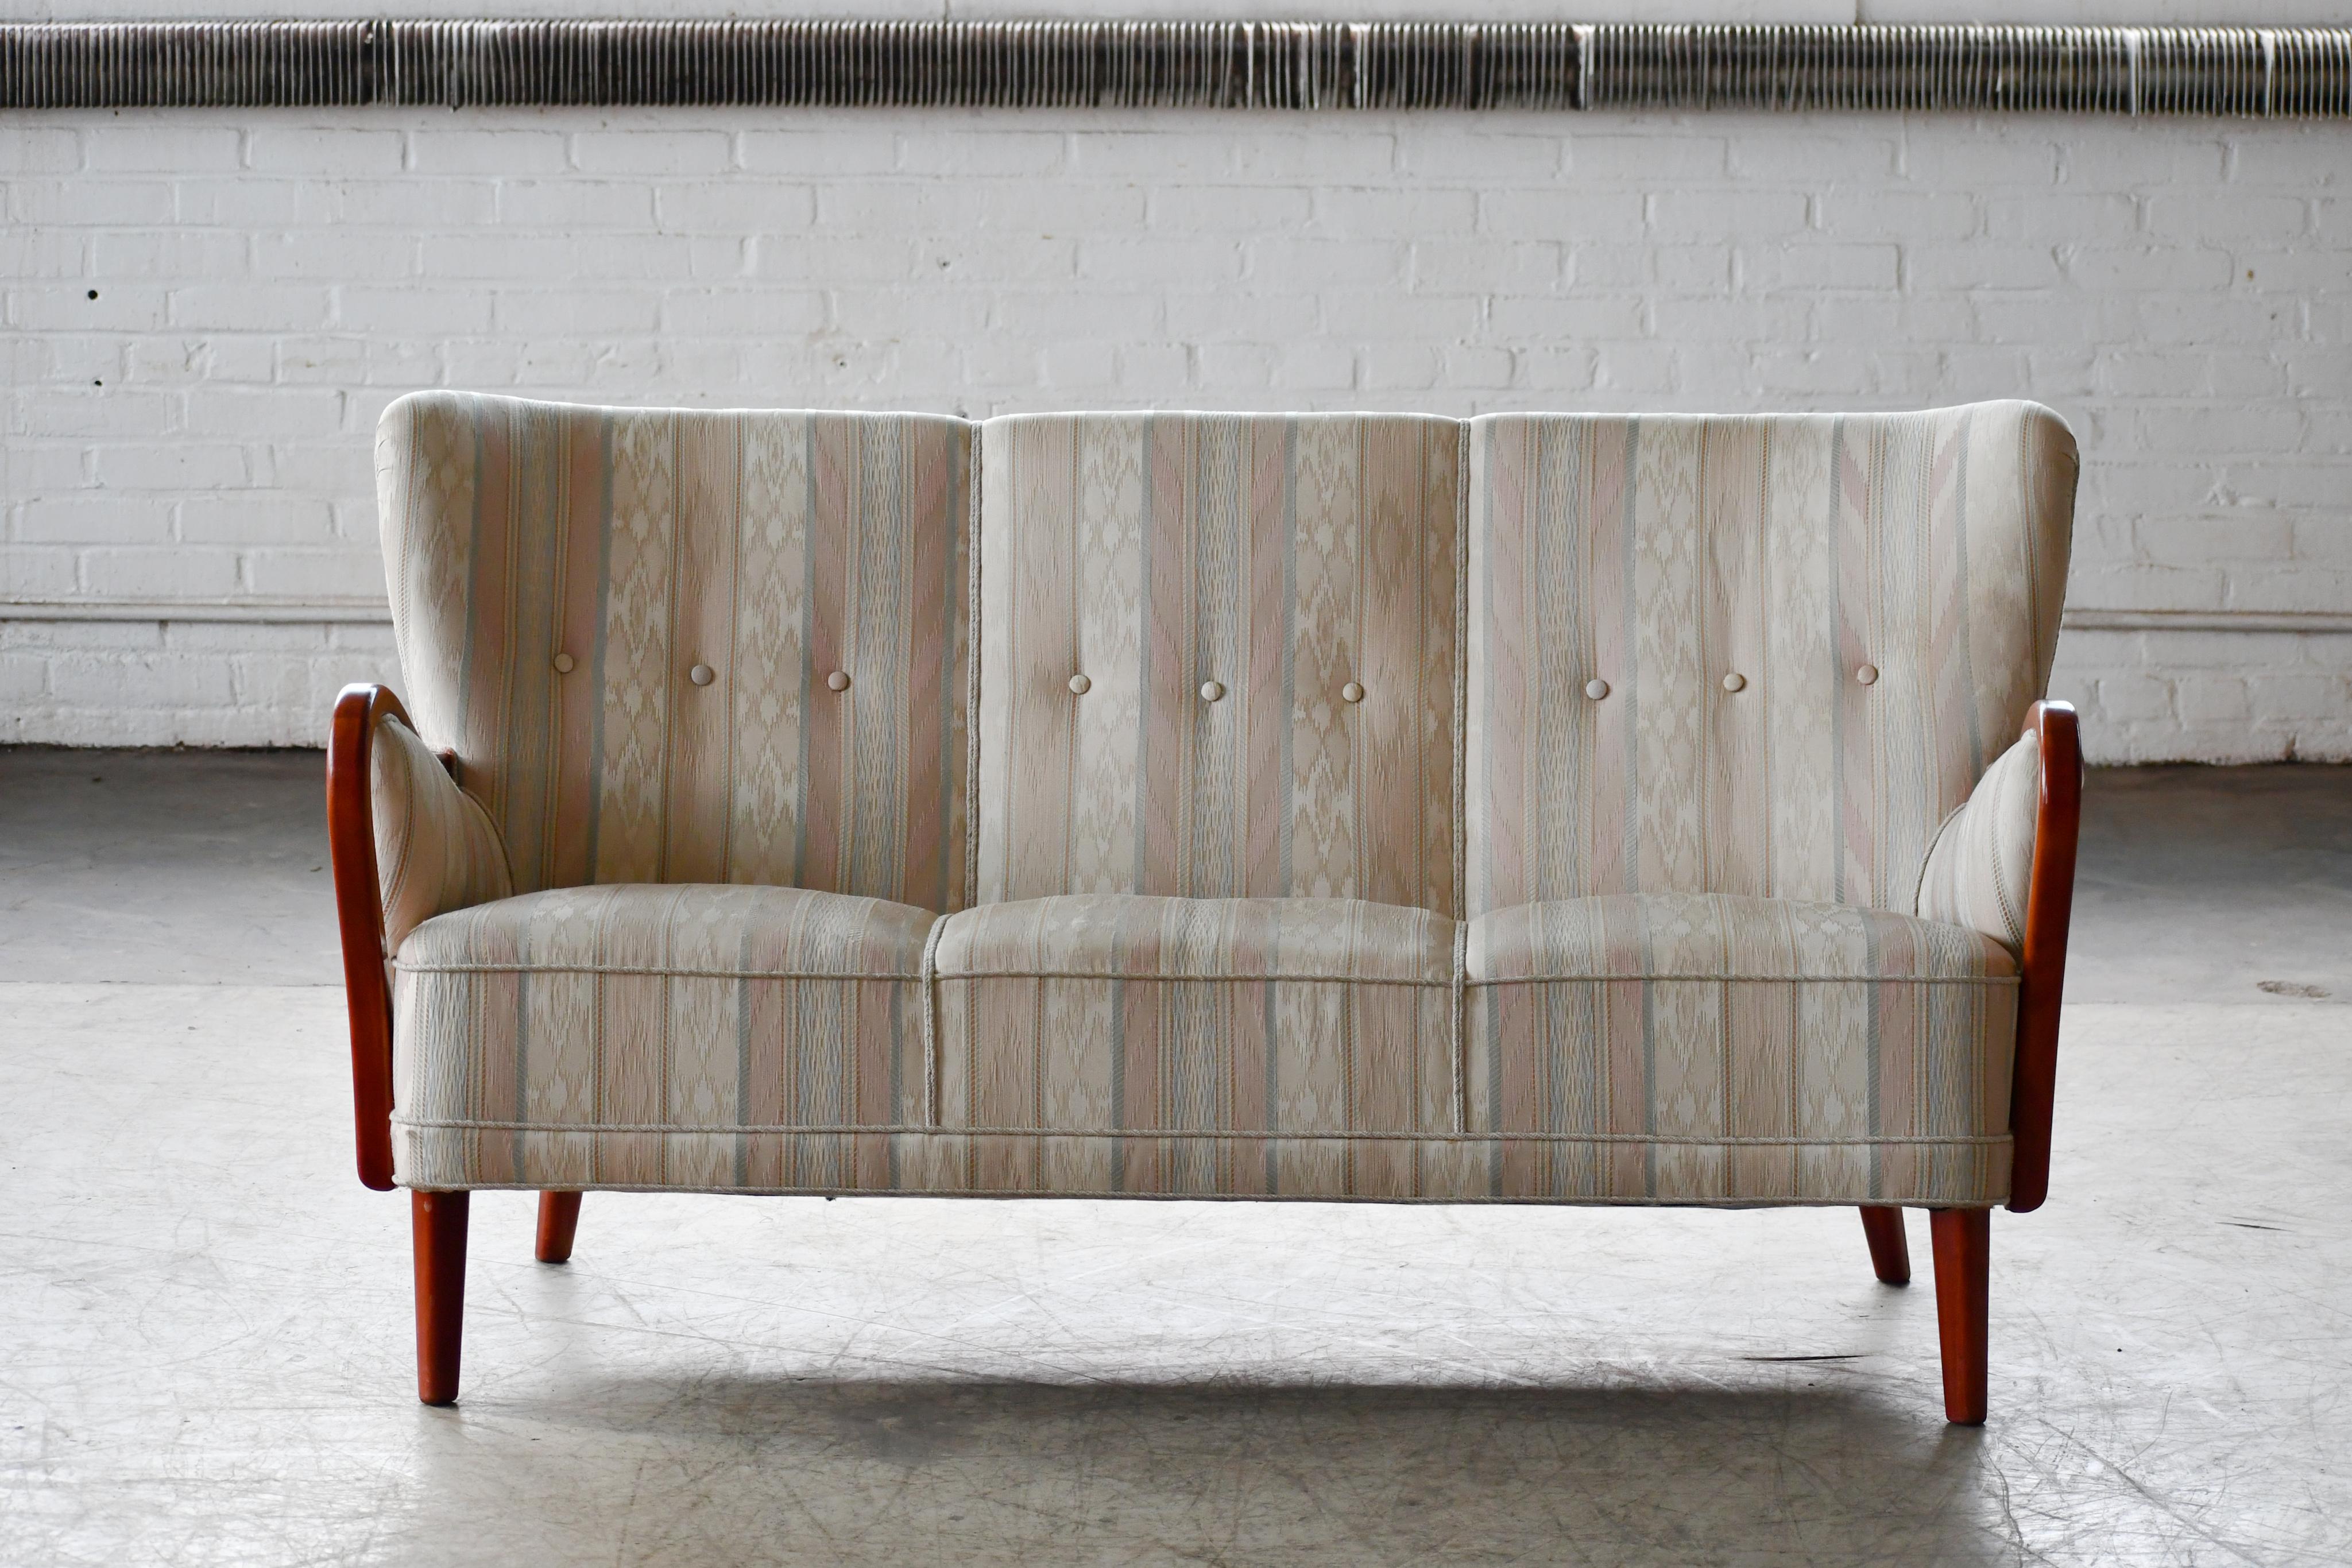 Fantastic 1940s Alfred Christensen designed sofa in his characteristic style of open armrests carved from solid elm wood and made by Slagelse Mobelvaerk in the 1940s. Beautiful refined lines with curving arms, coil springs in the seat and tufted